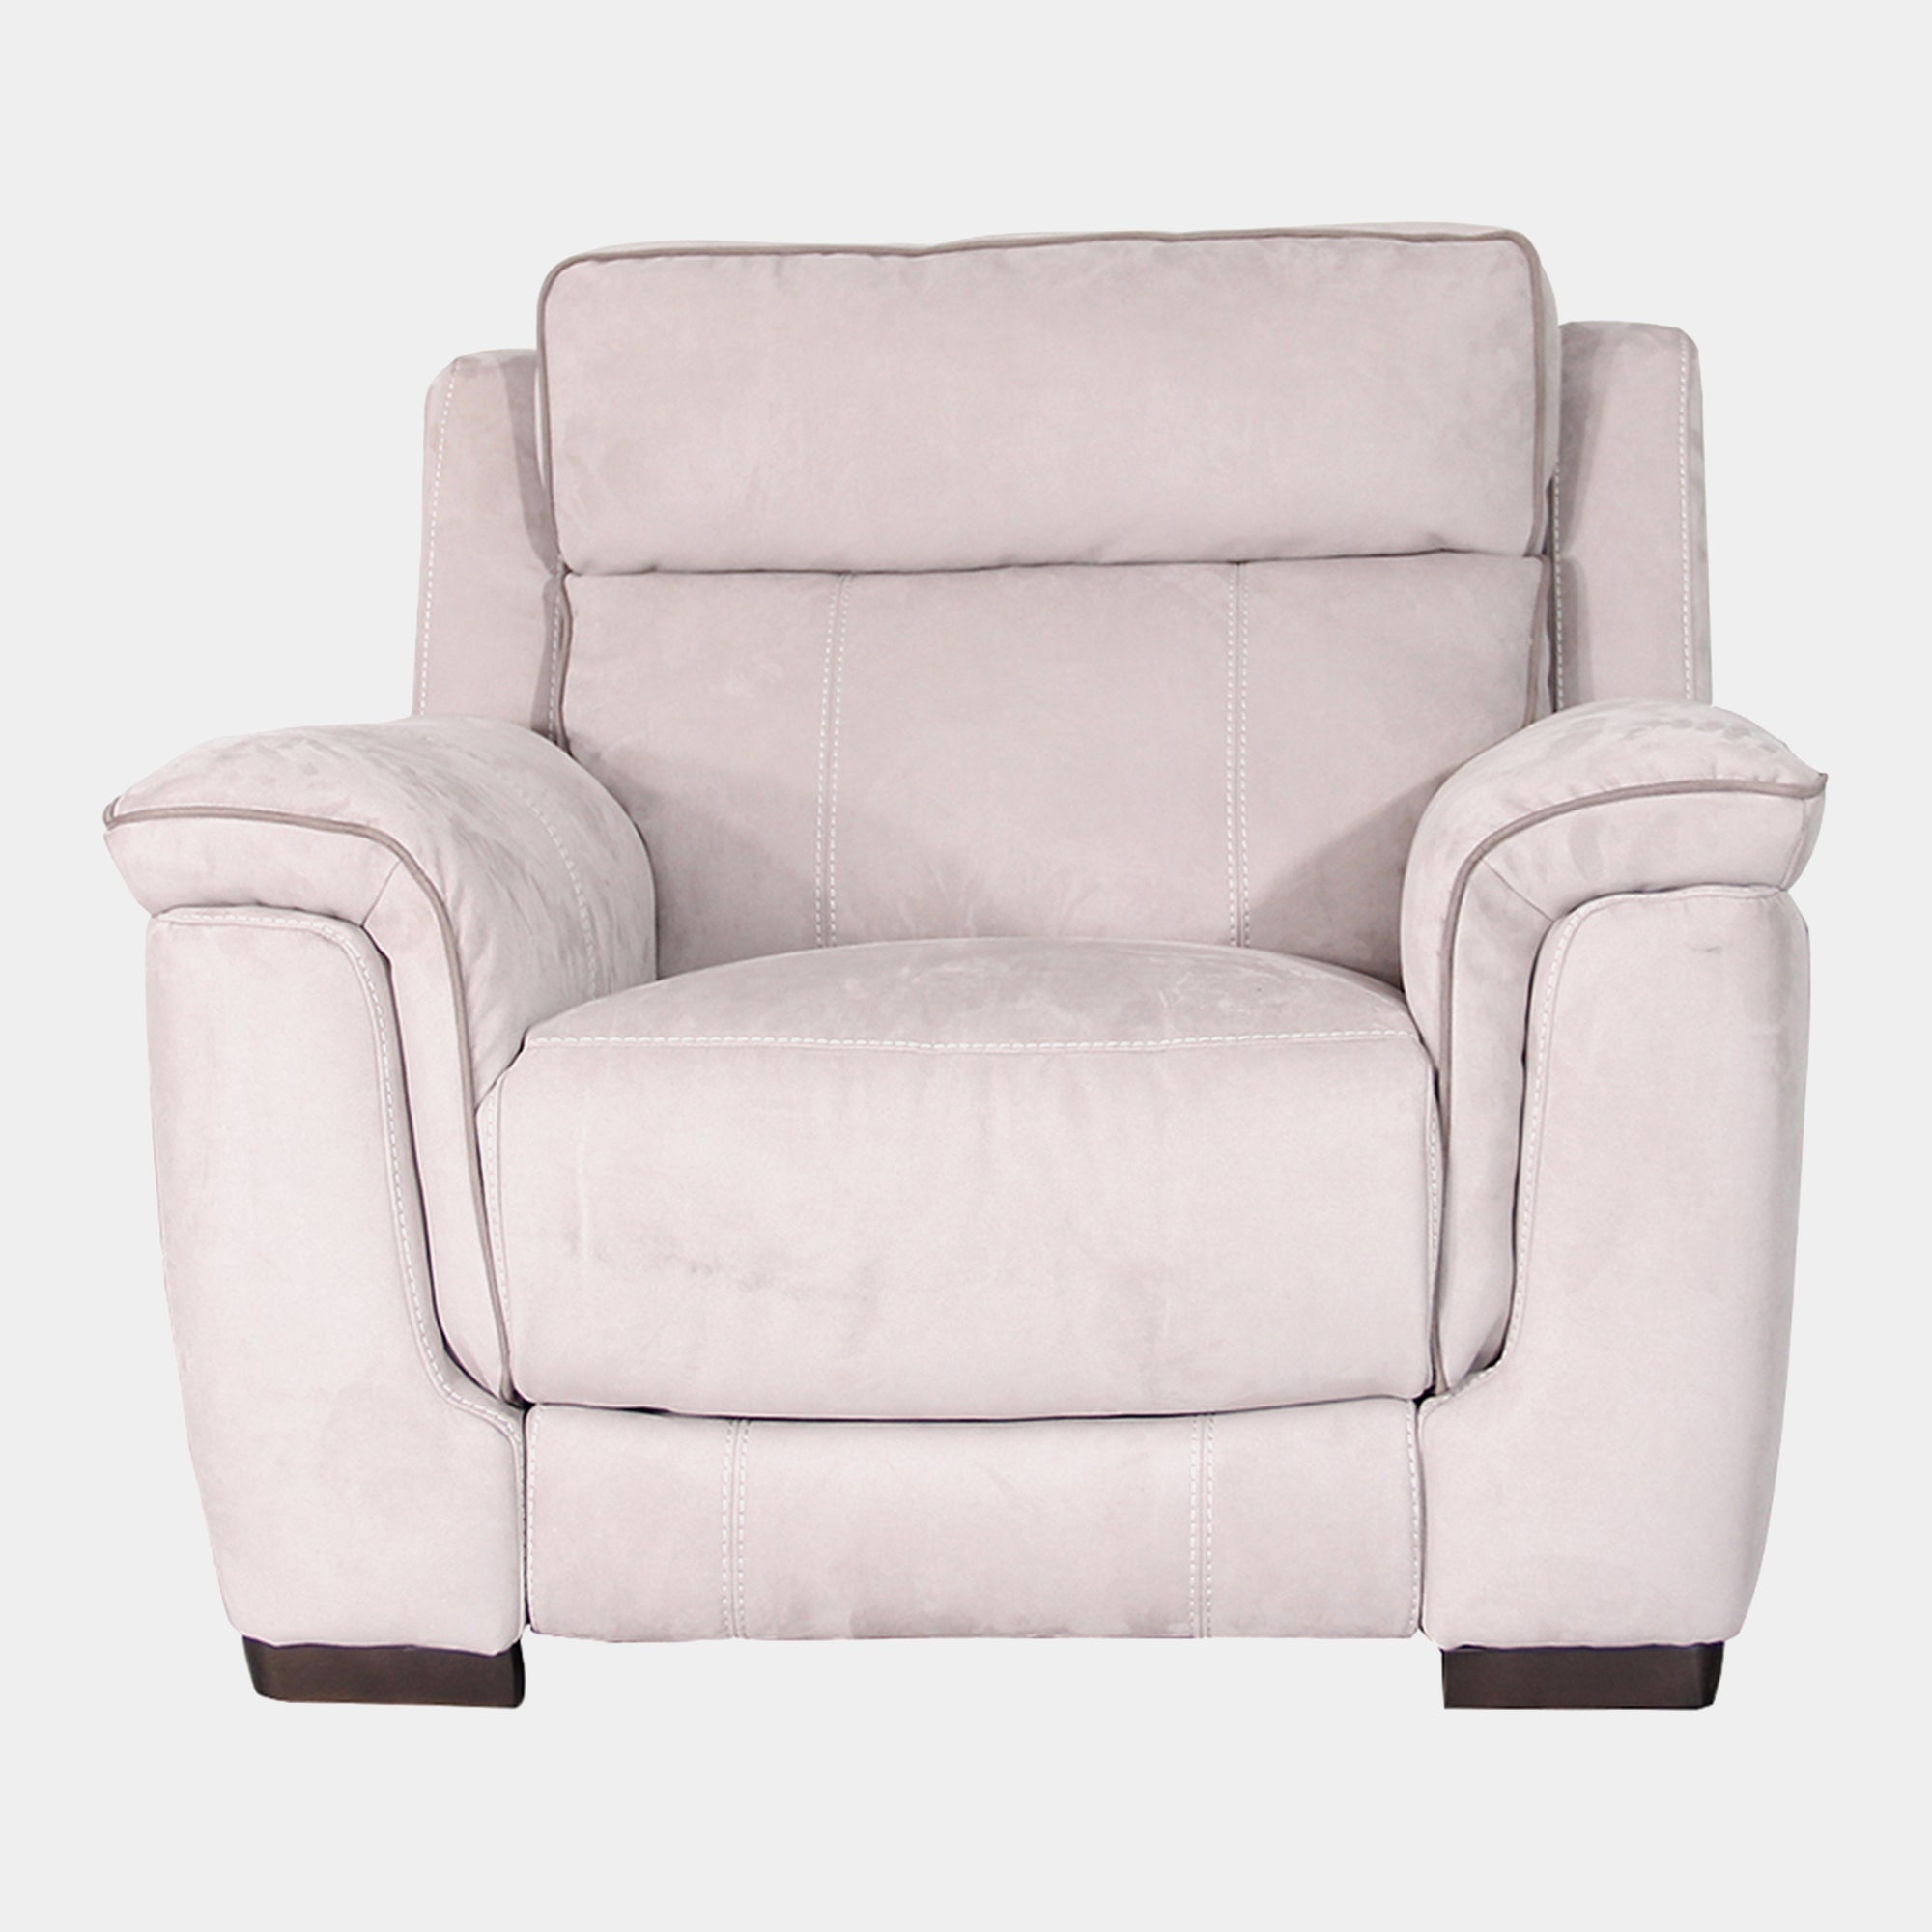 Monza - Power Reclining Chair In Fabric